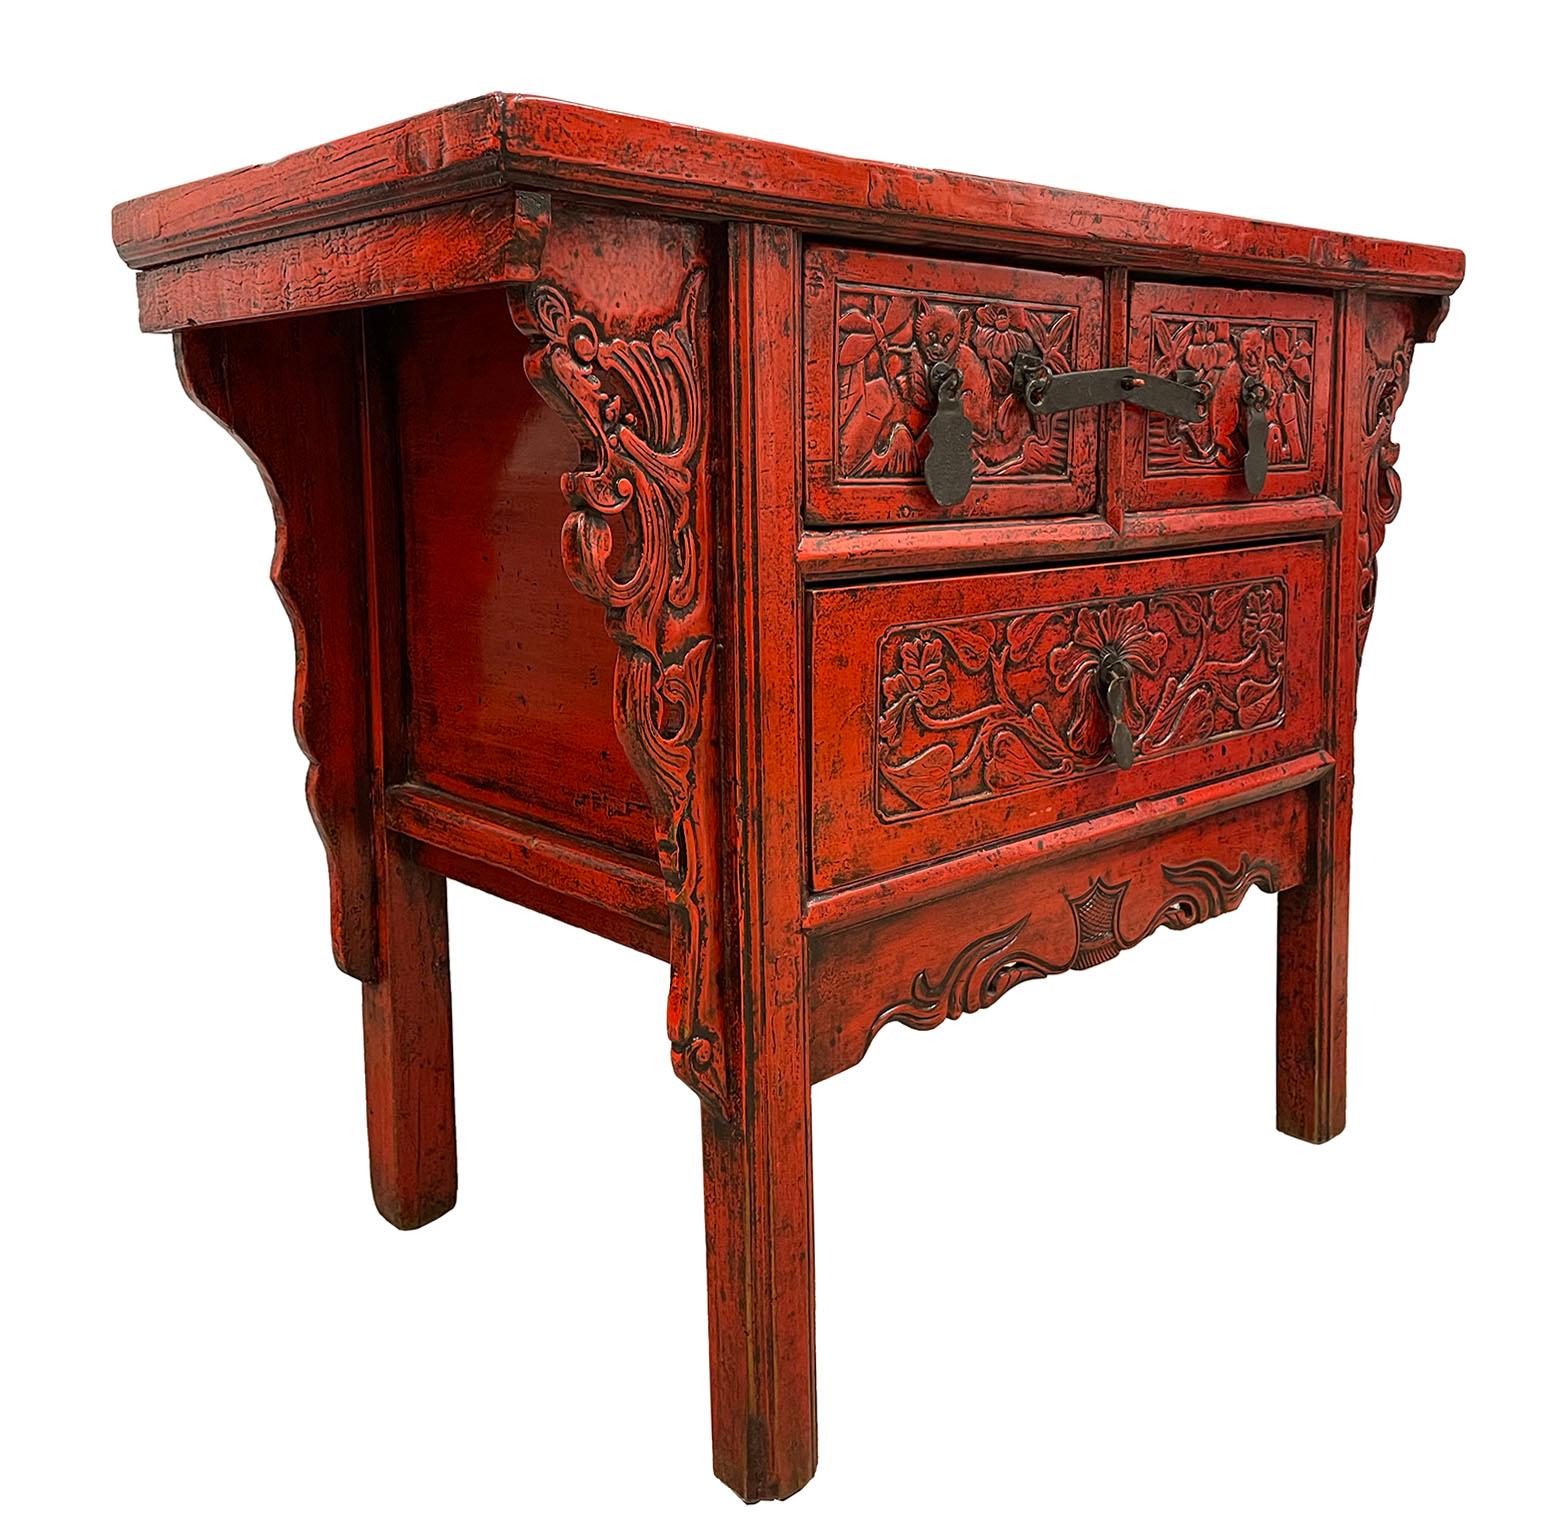 This beautiful antique Chinese console table has beautiful traditional detailed deep/raised carving works on the front drawer panels and legs. This console table features 2 small drawers on the top and 1 large drawer underneath. All drawers have